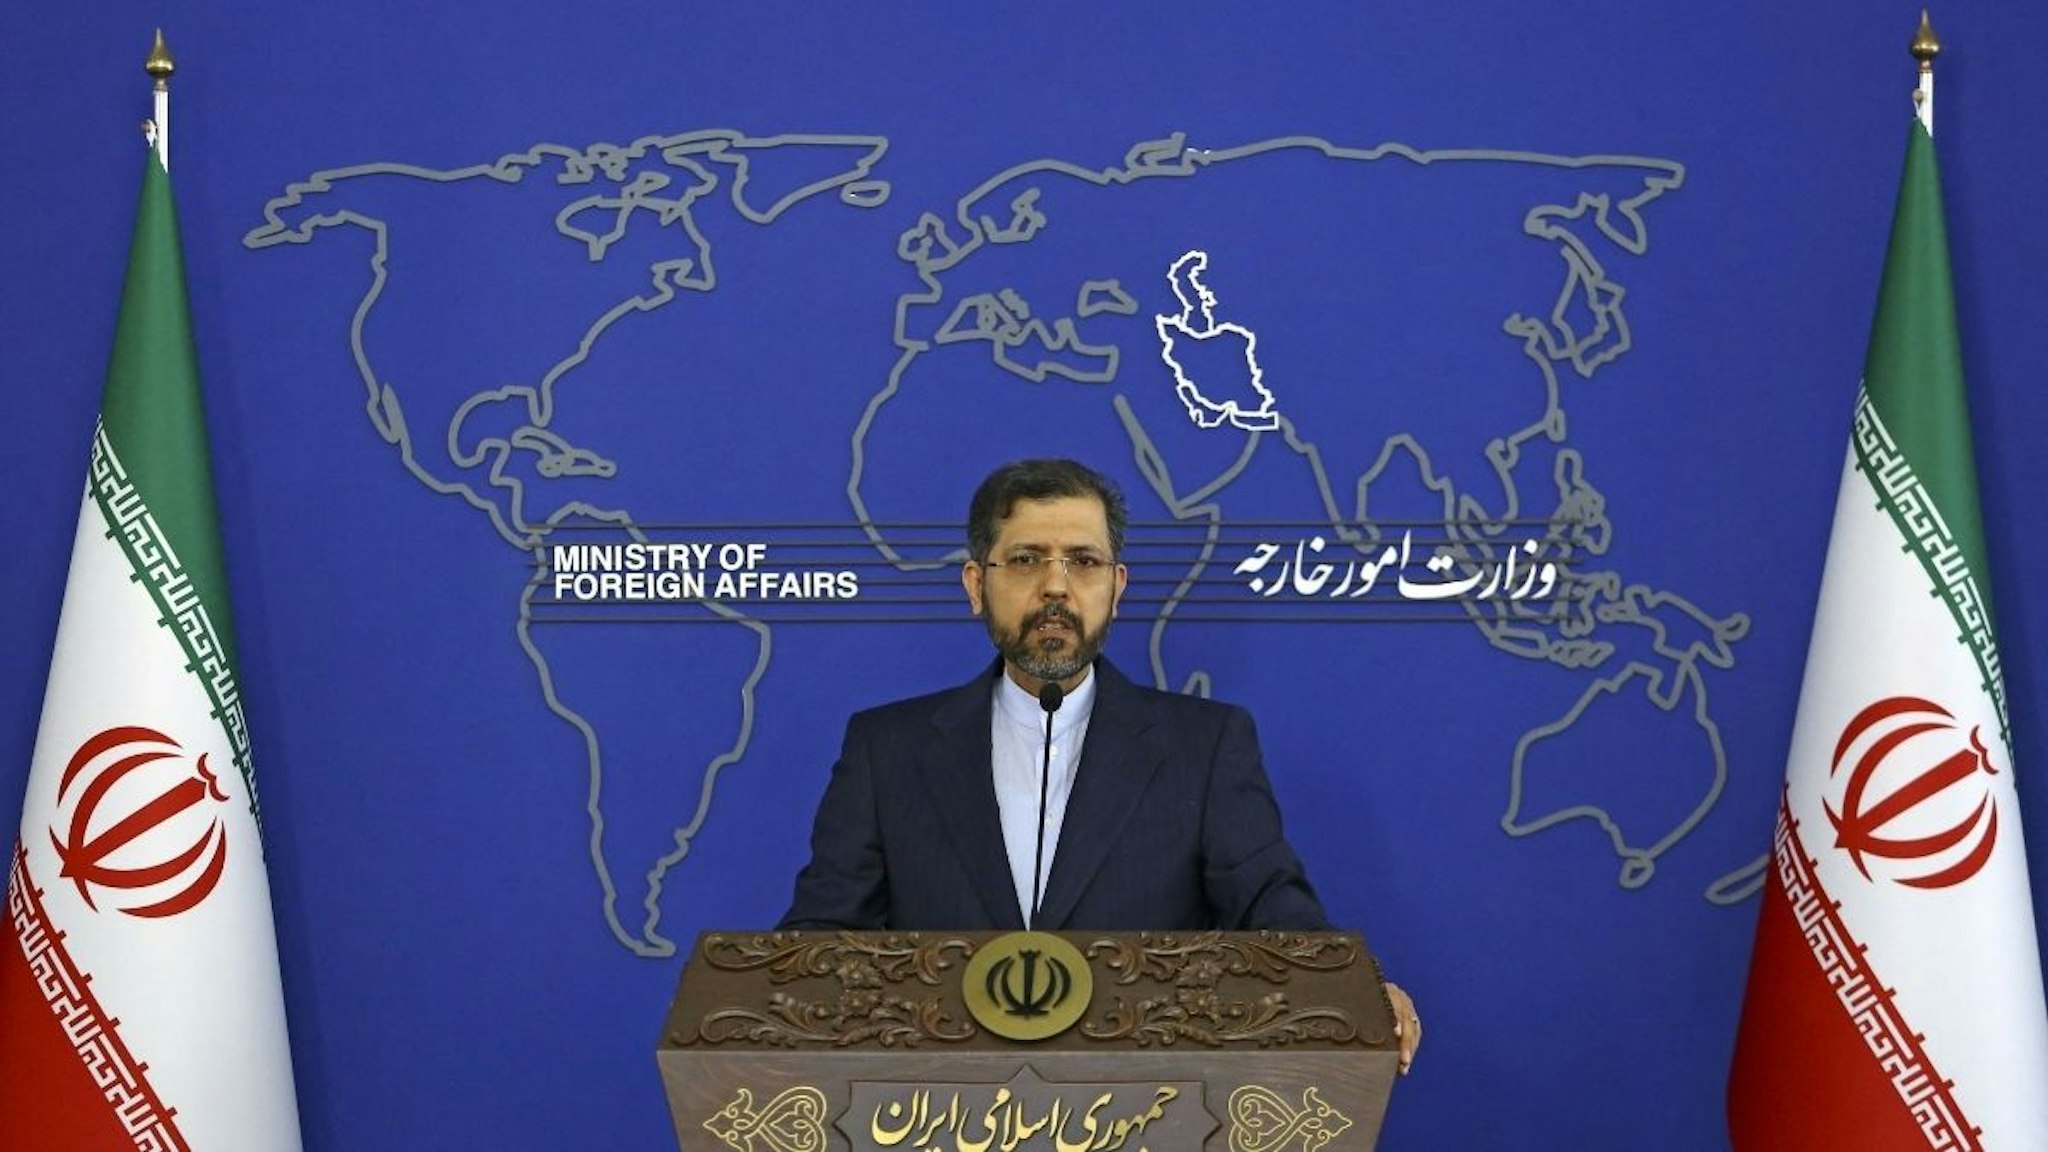 Iran's foreign ministry spokesman Saeed Khatibzadeh addresses a press conference in Tehran, on March 14, 2022.